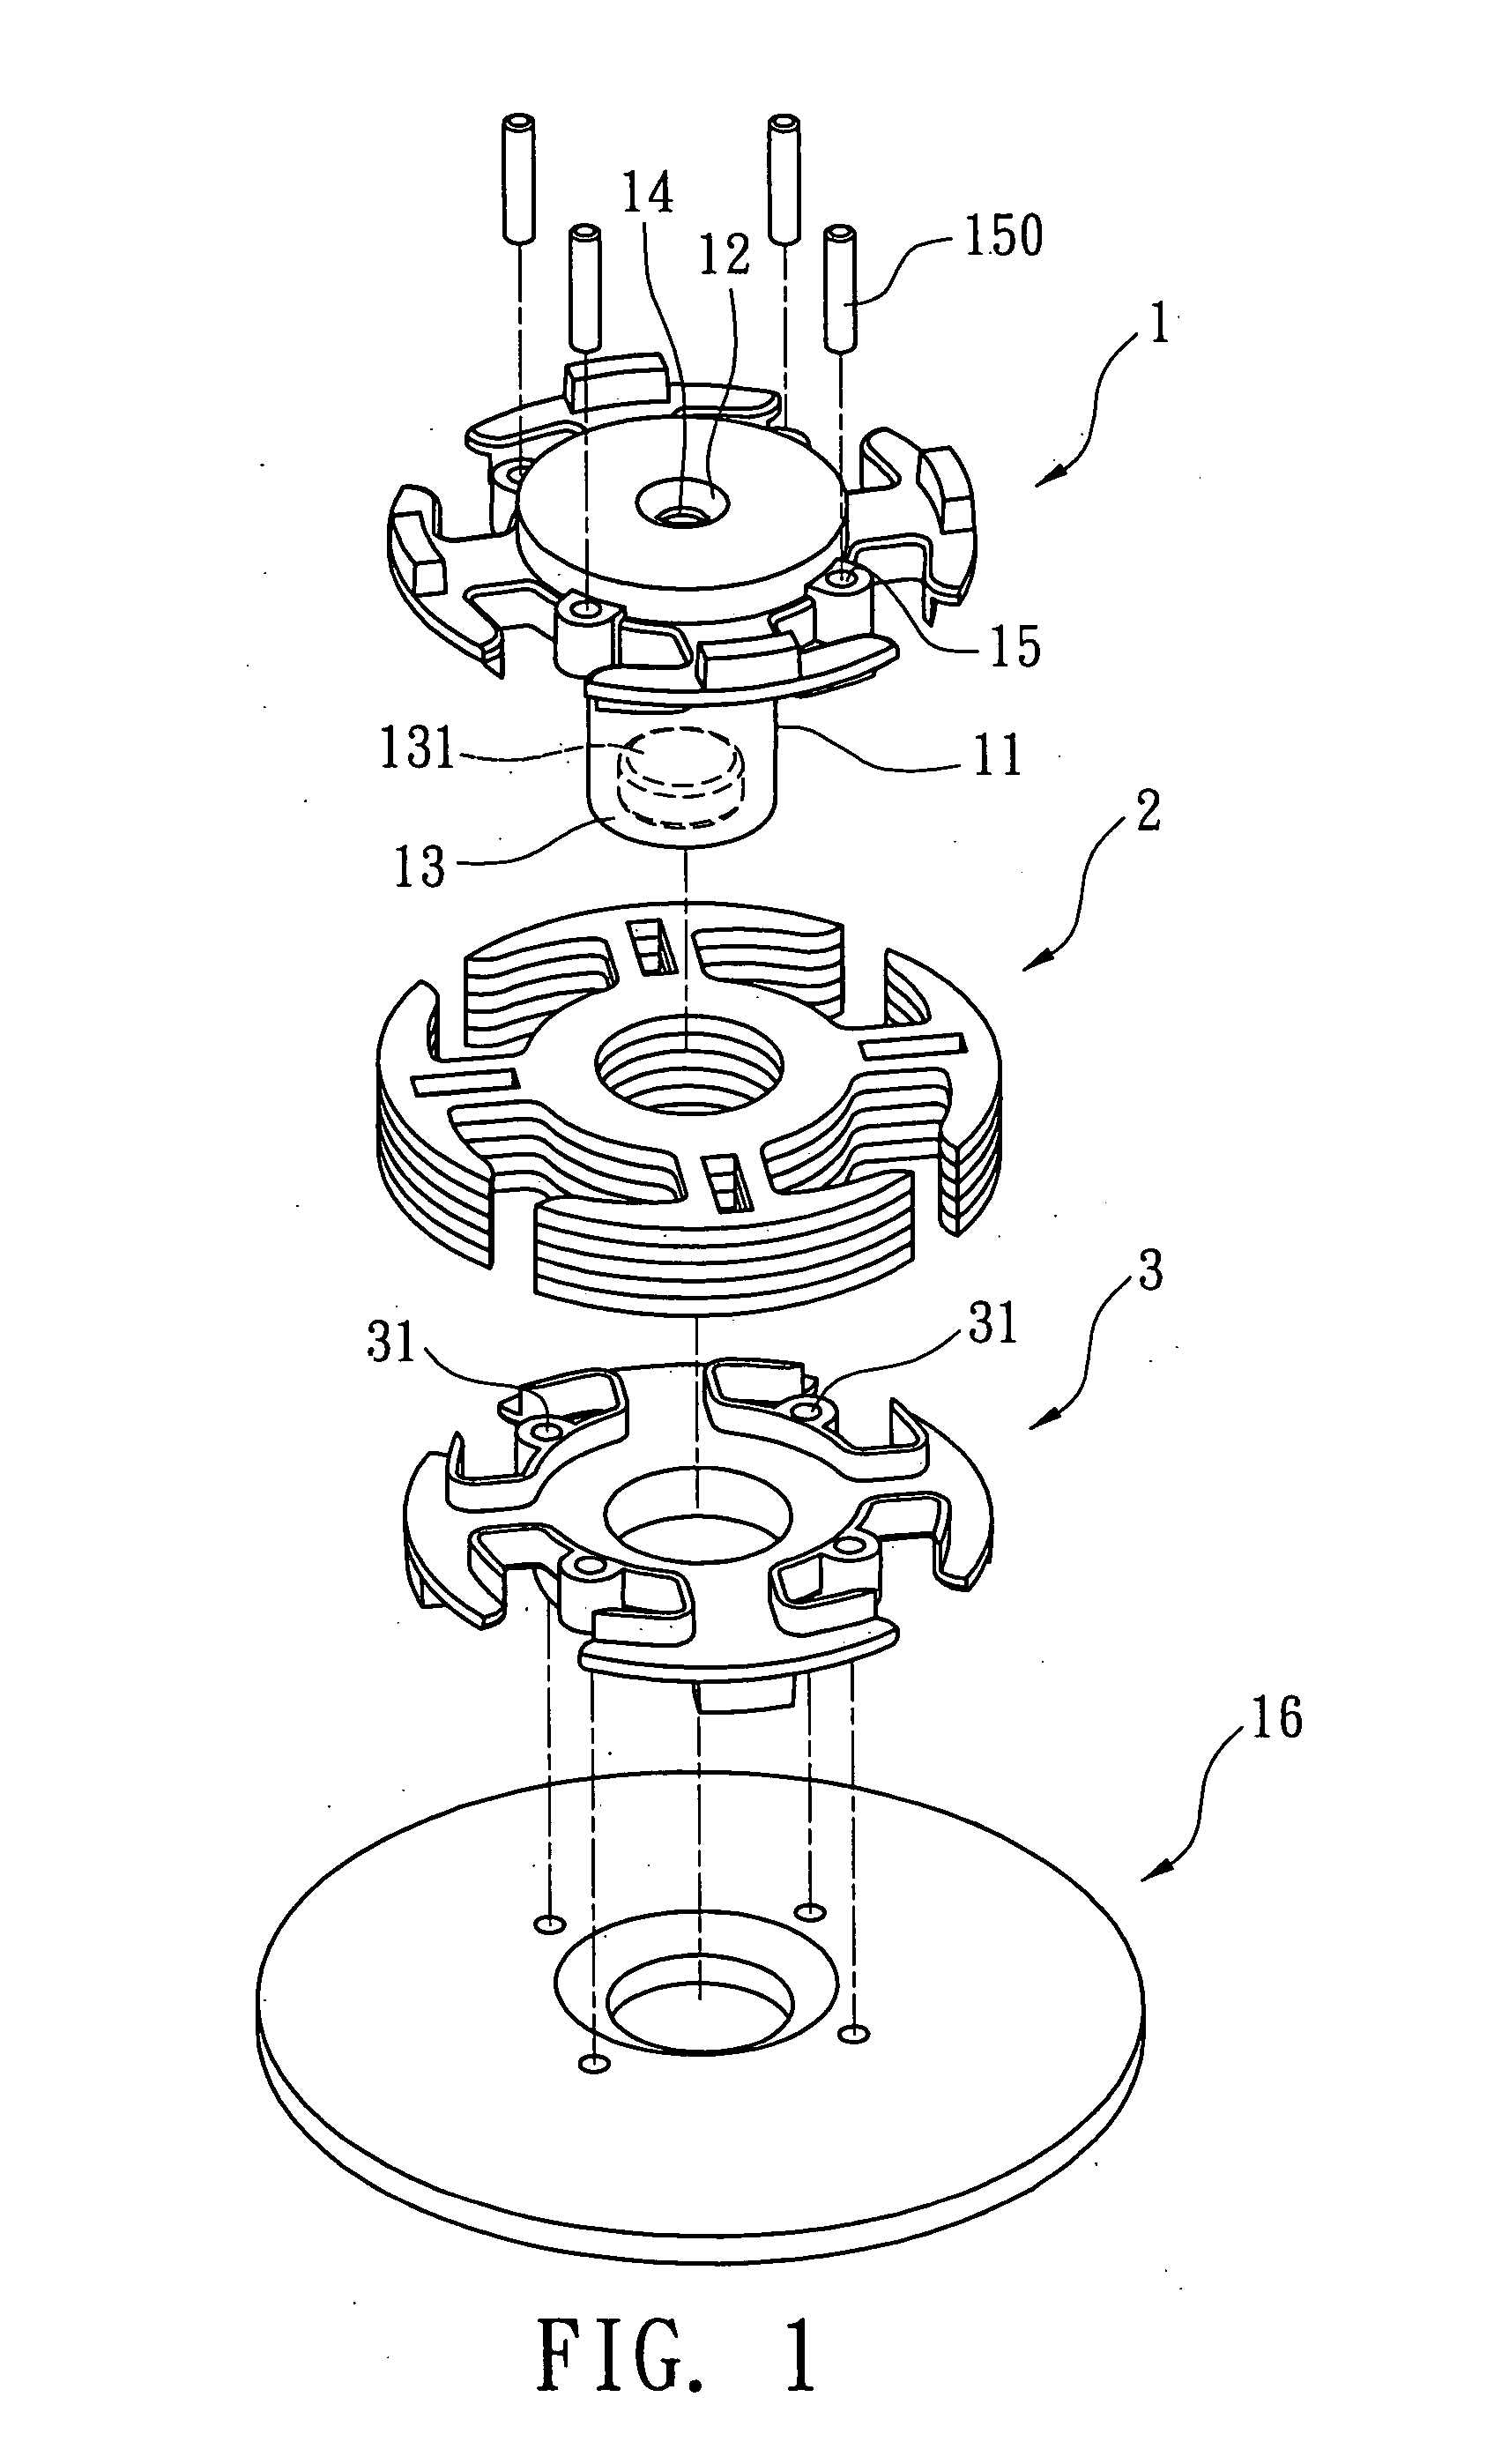 Motor assembly structure